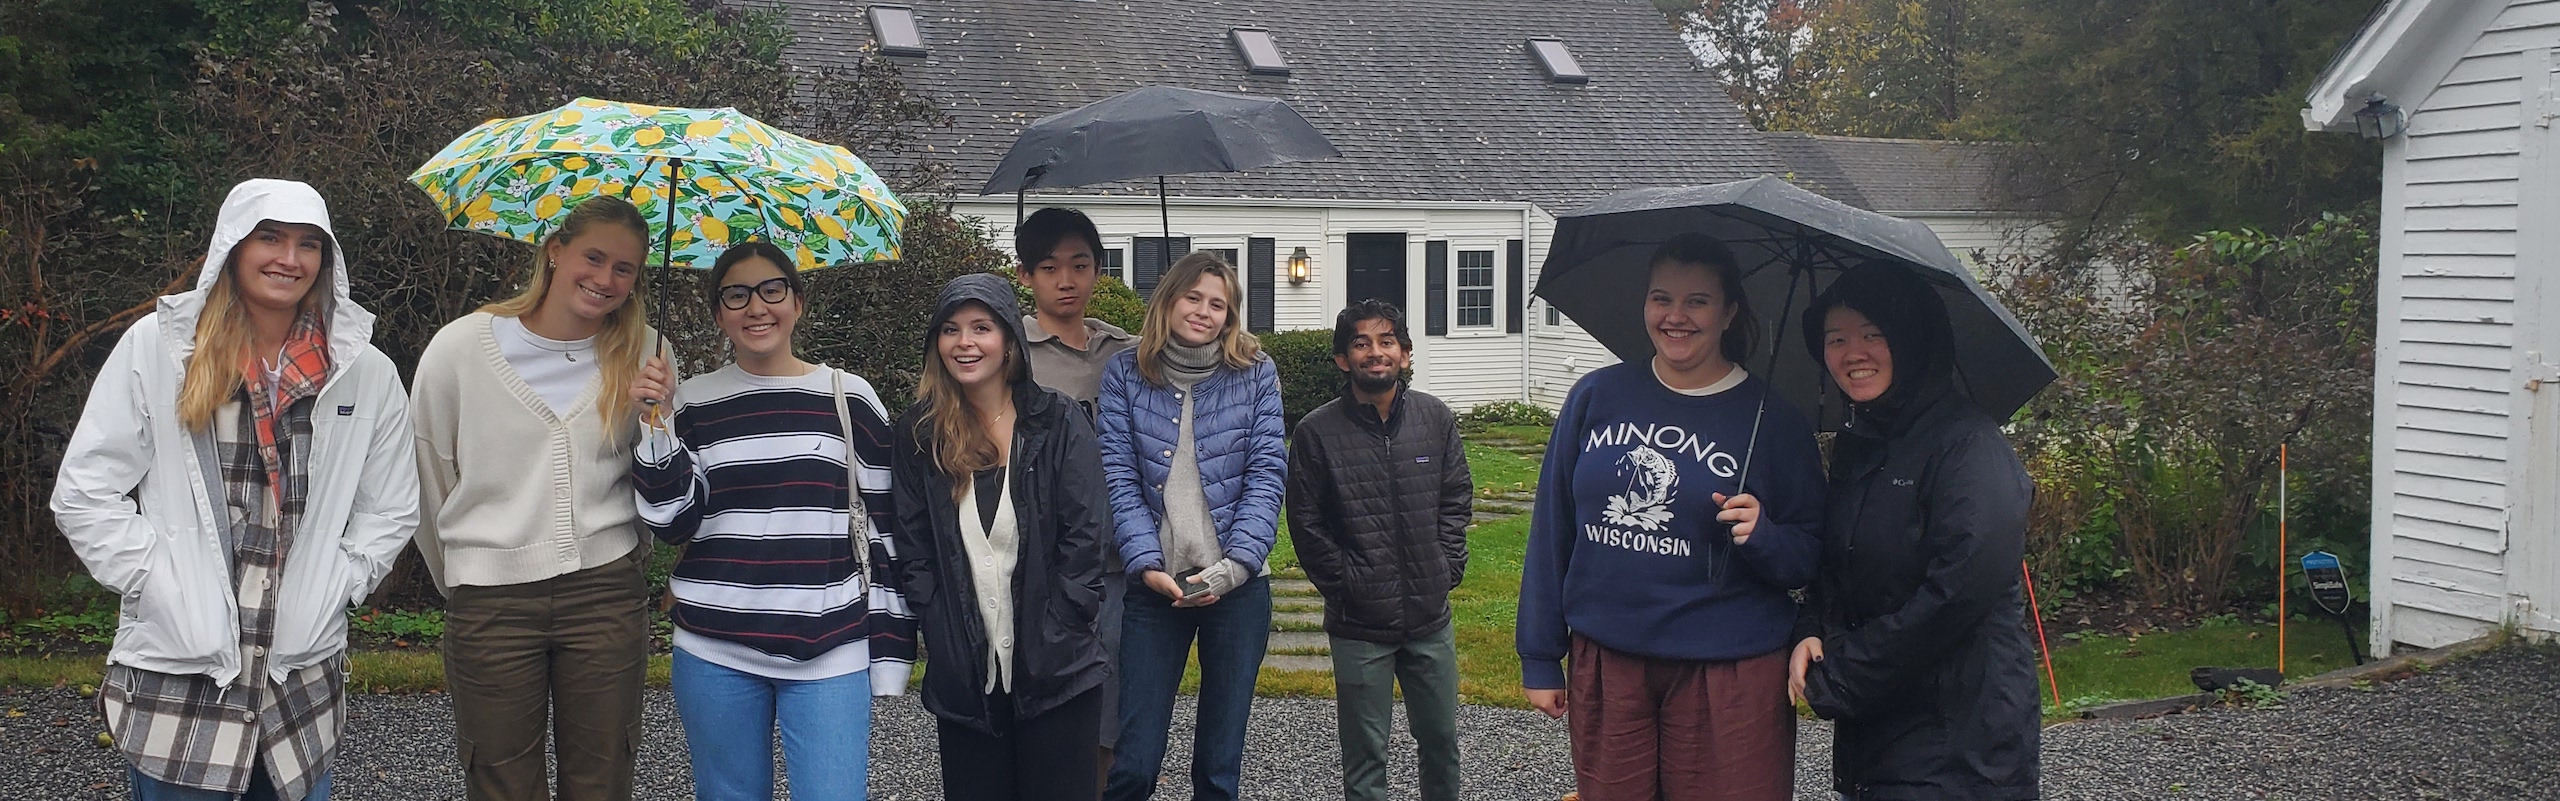 Students standing in the rain on immersion trip in Maine